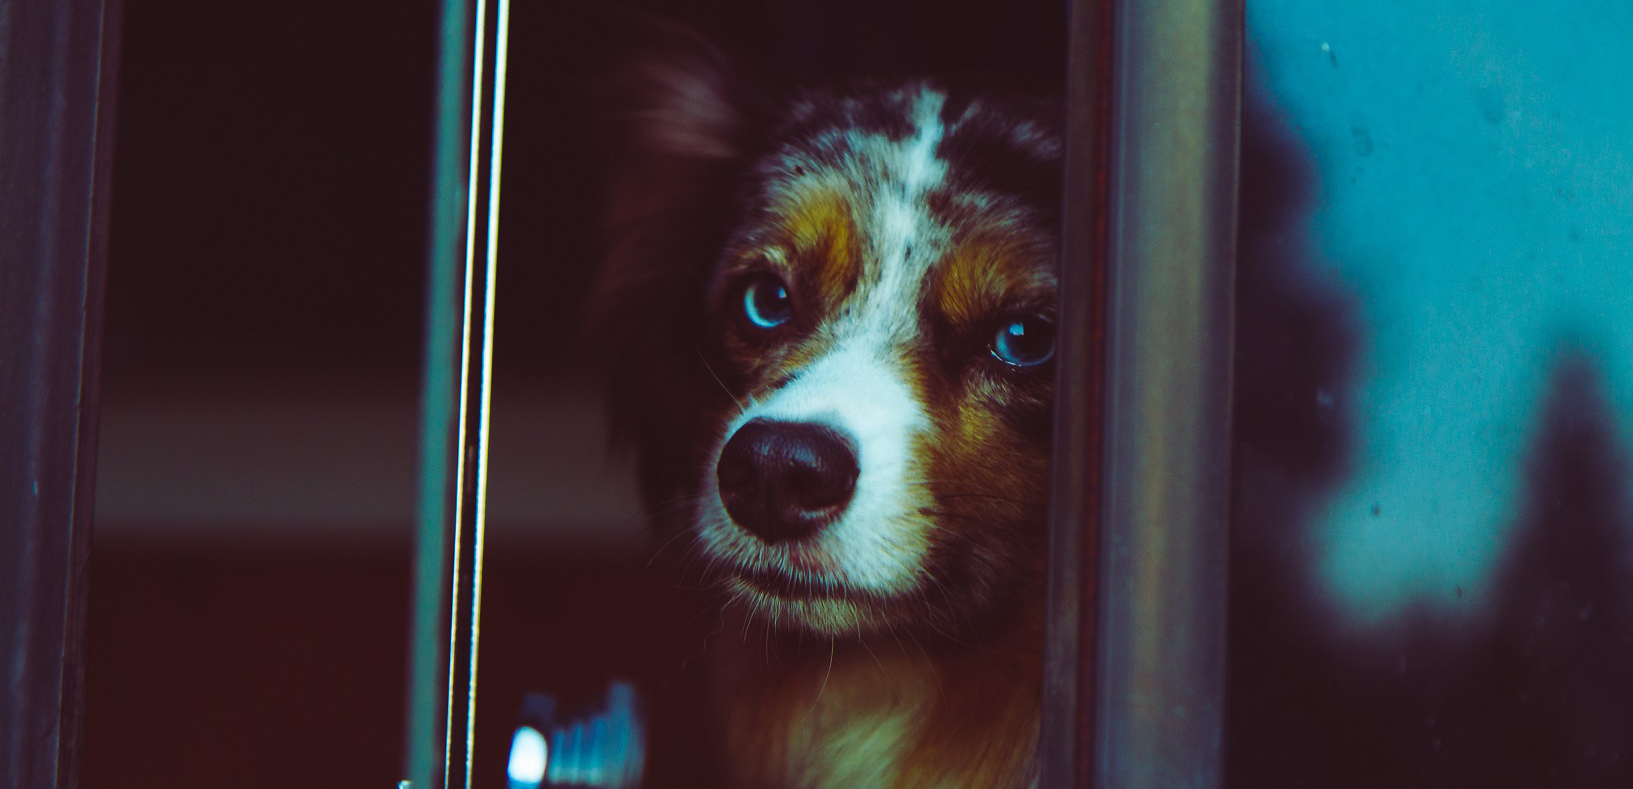 A multi-colored dog looks out the window of a train during ground transportation